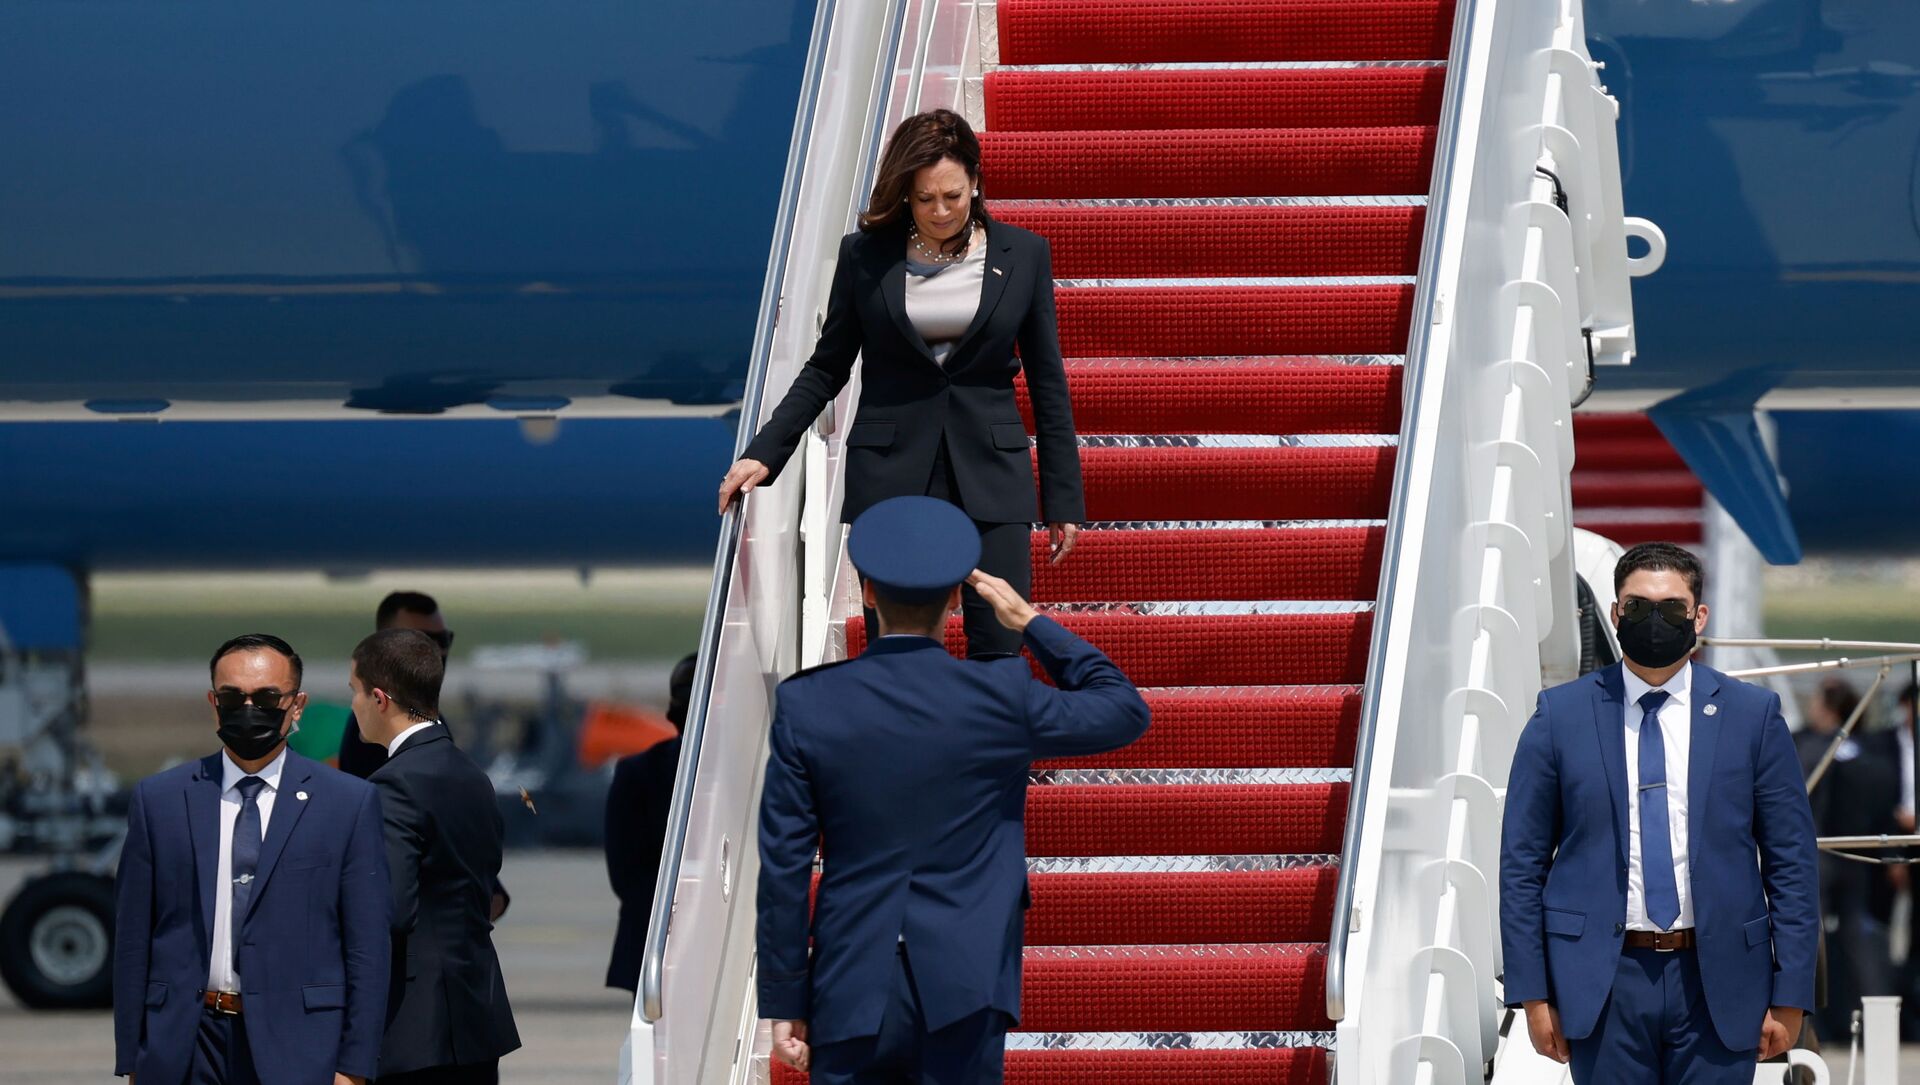 US Vice President Kamala Harris gets off the Air Force Two, after technical difficulties that made her change planes for her first international trip as Vice President to Guatemala and Mexico, at Joint Base Andrews, Maryland, 6 June 2021 - Sputnik International, 1920, 08.06.2021